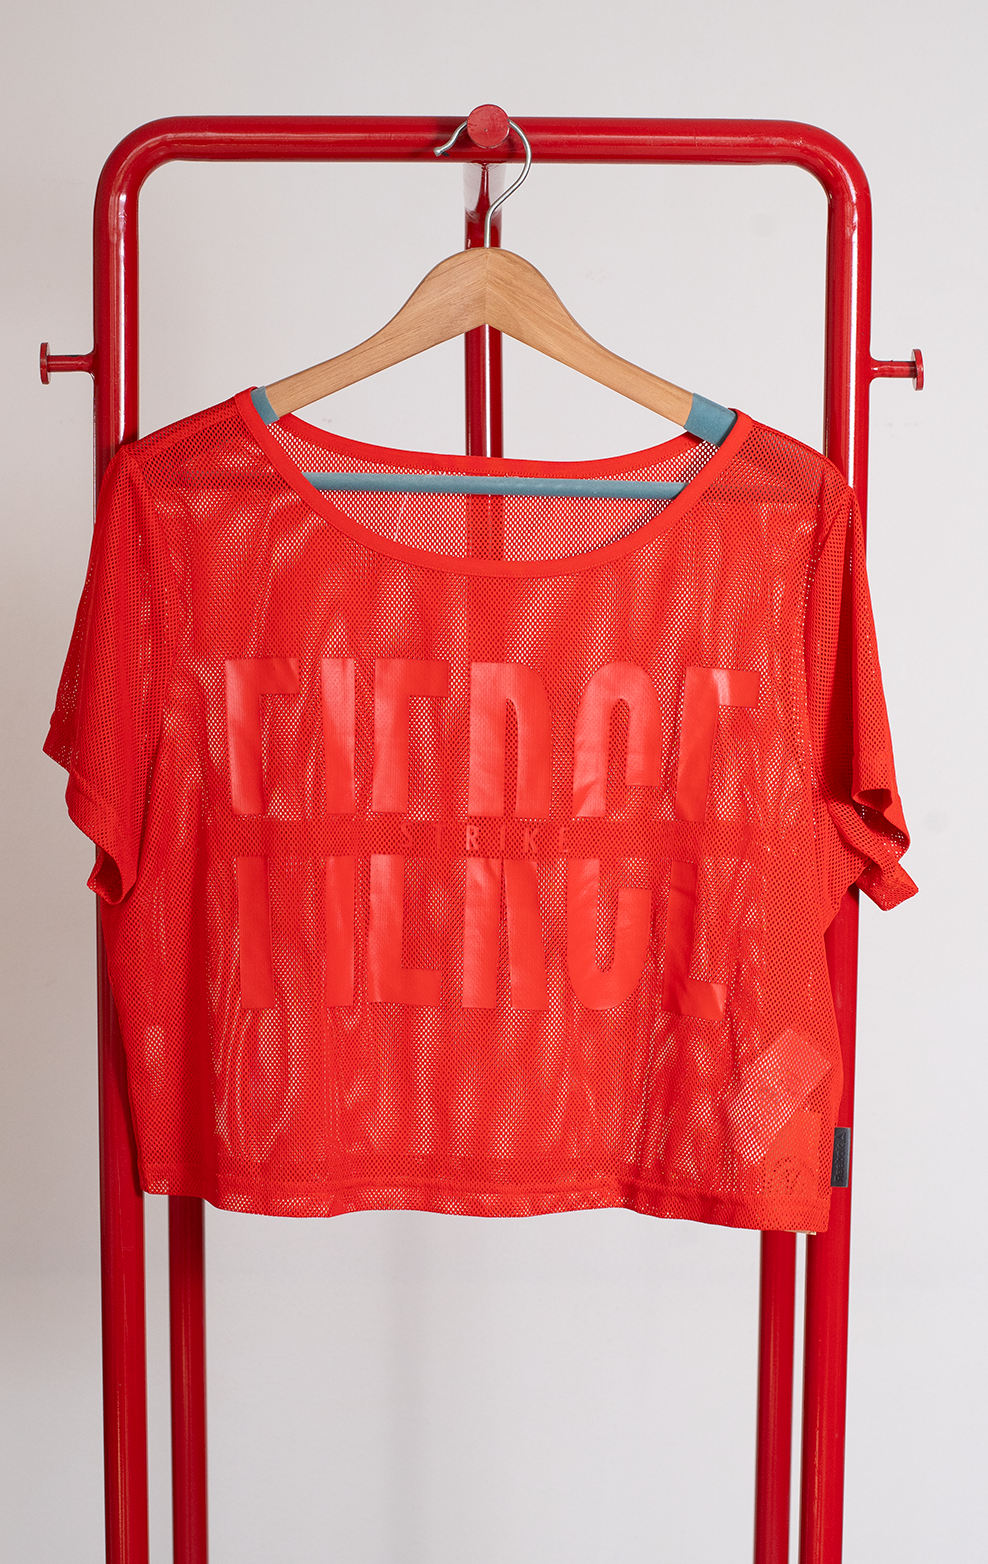 REEBOK TOP - Red mesh - Small